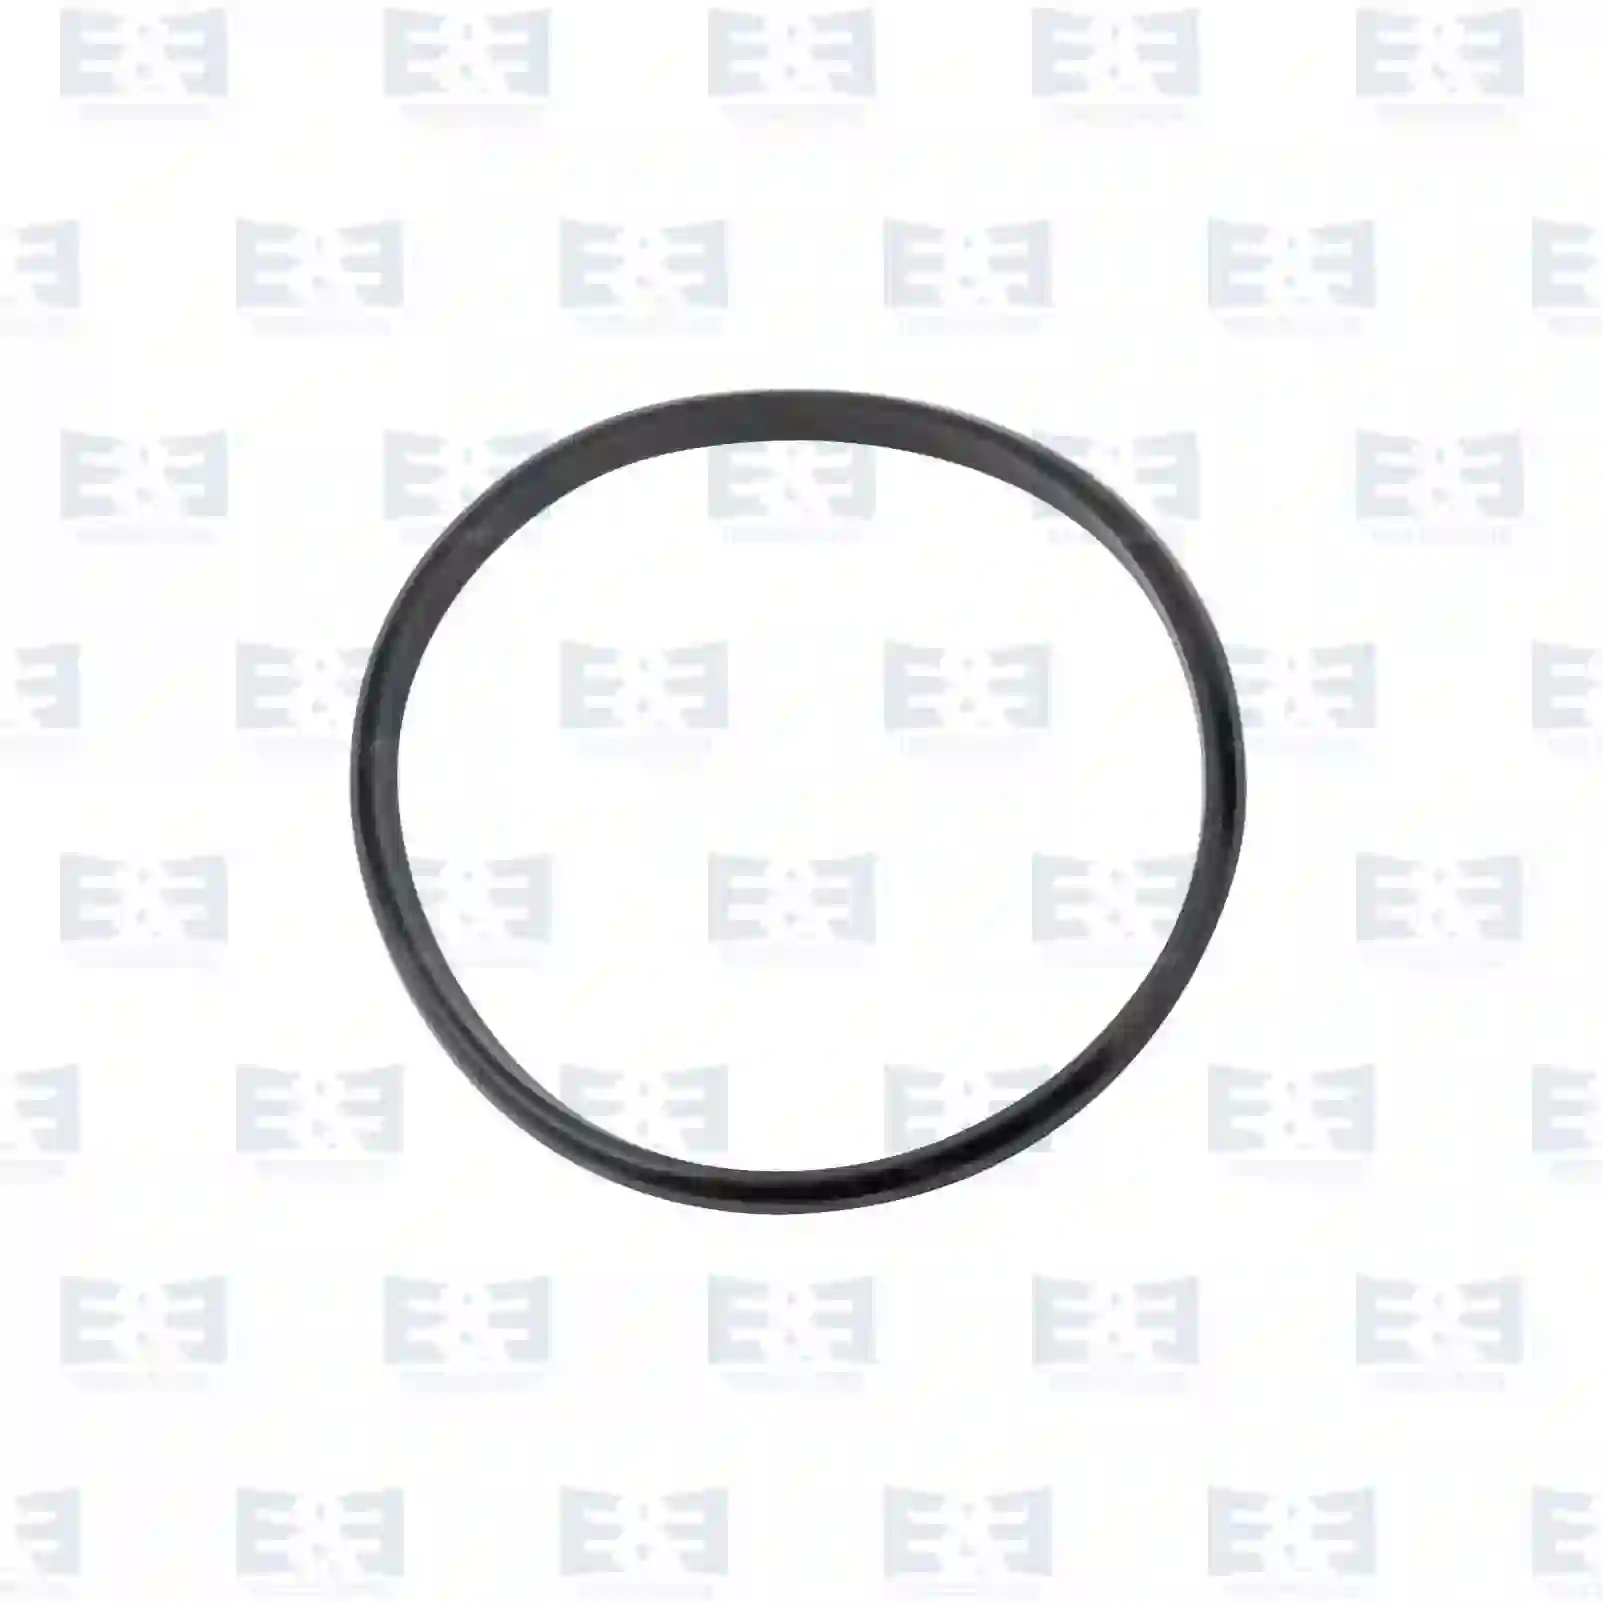 Bearing Bracket, Bogie Suspension Seal ring, EE No 2E2281999 ,  oem no:1593522, ZG30146-0008, E&E Truck Spare Parts | Truck Spare Parts, Auotomotive Spare Parts